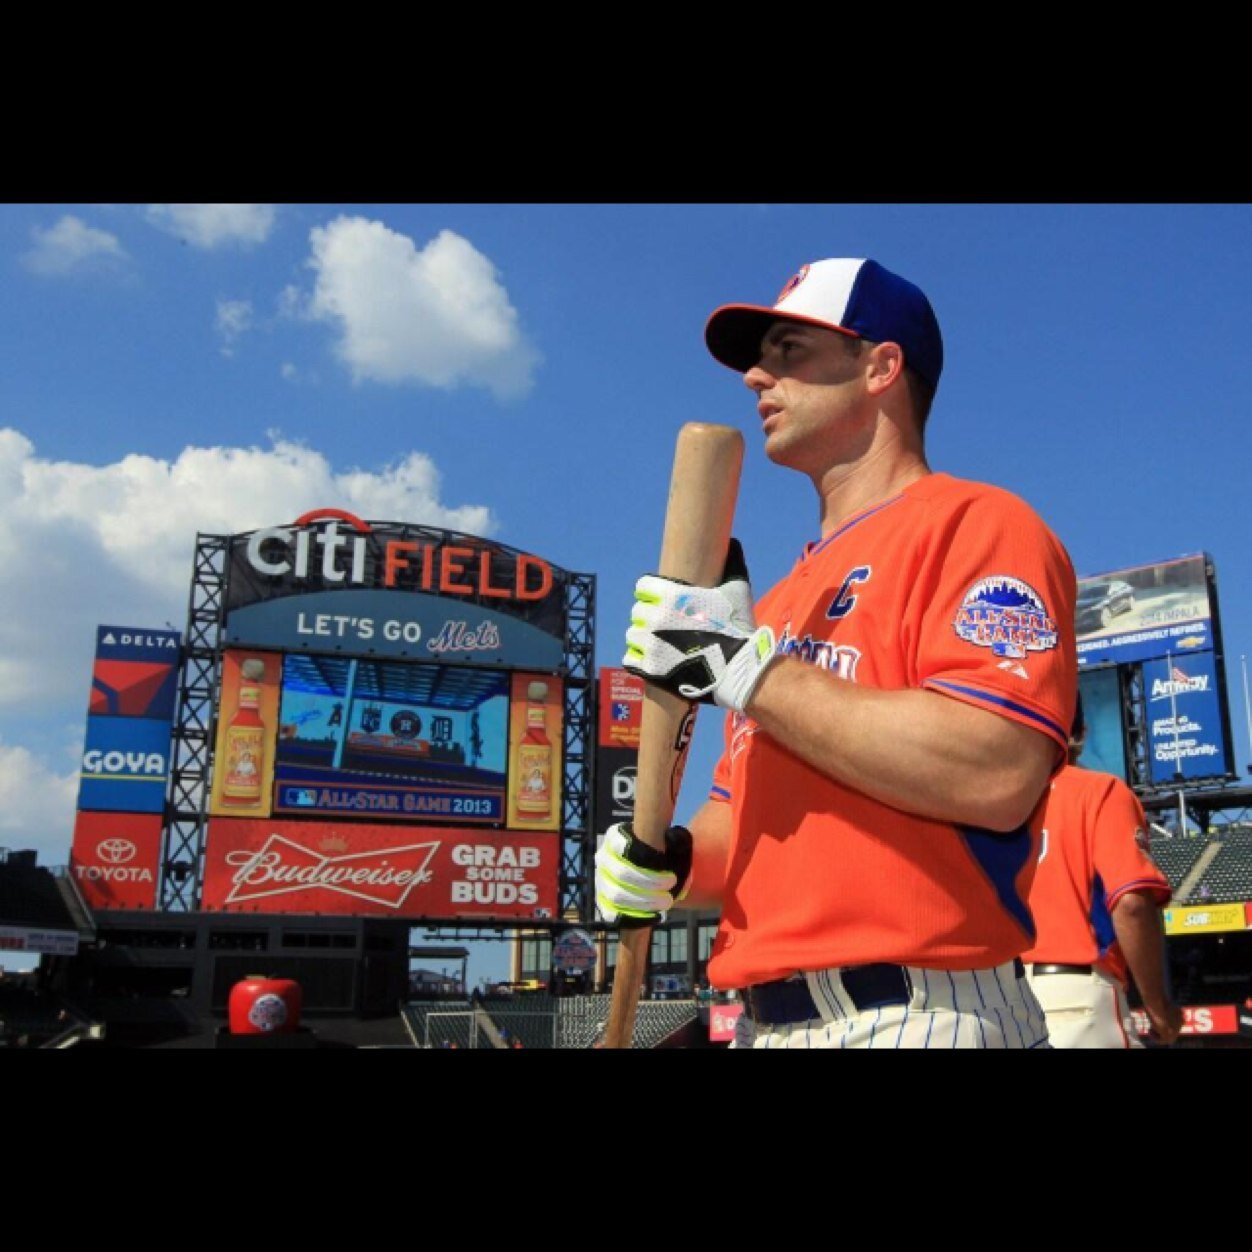 EVERYTHING DAVID WRIGHT 
*paradoy* 
Not affiliated with David wright or the New York Mets